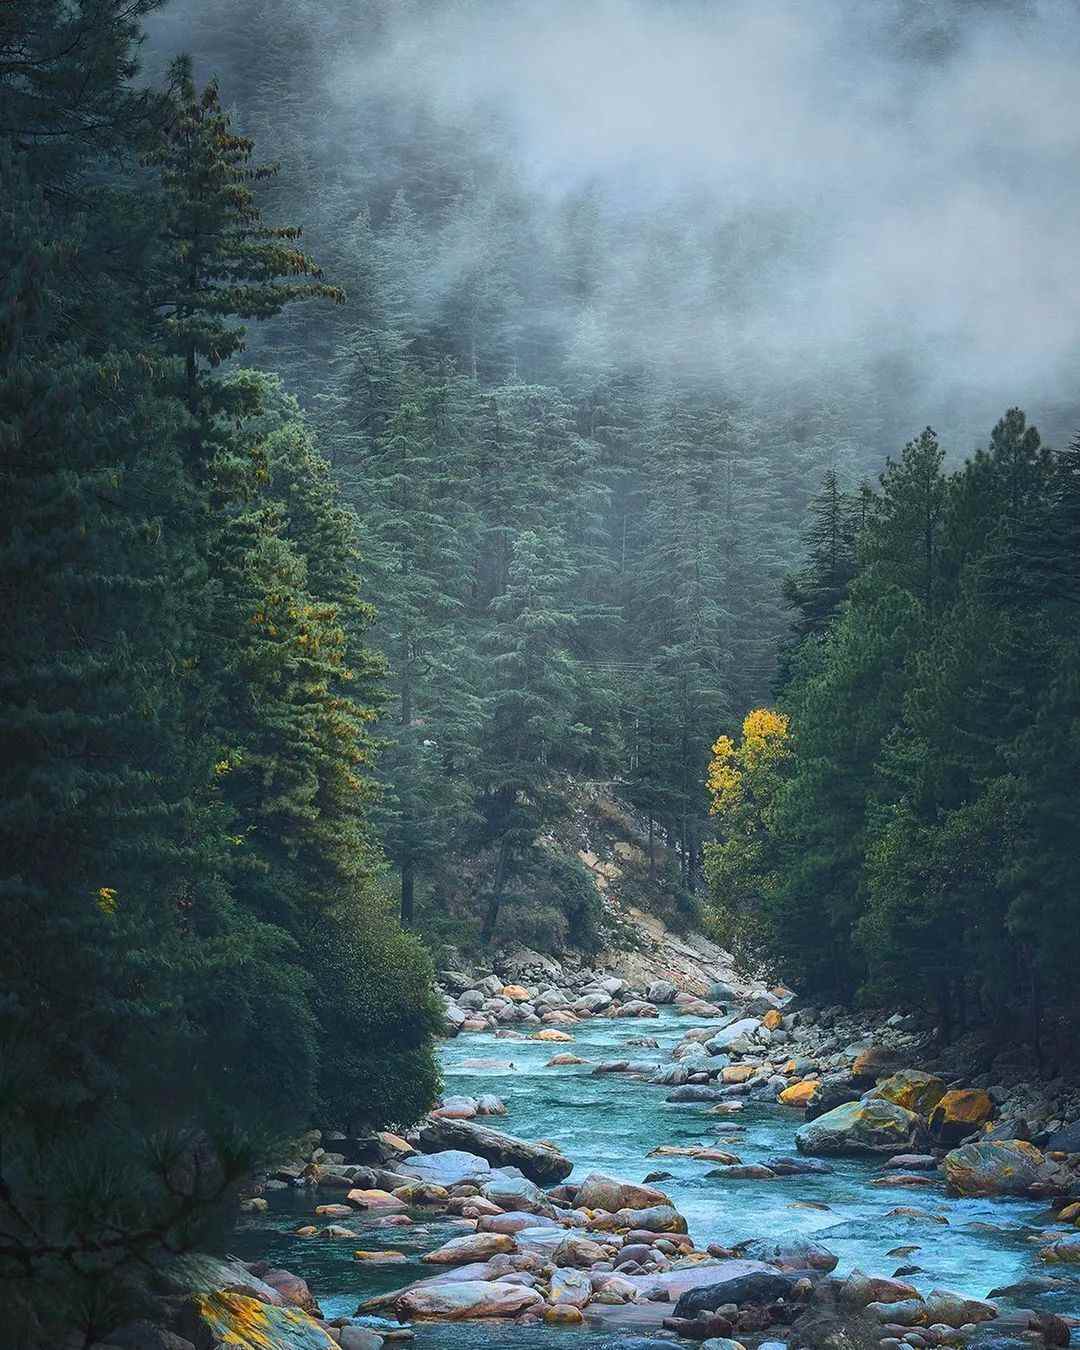 At Kasol, people can make a trip to Chalal, a quaint spot where they relax